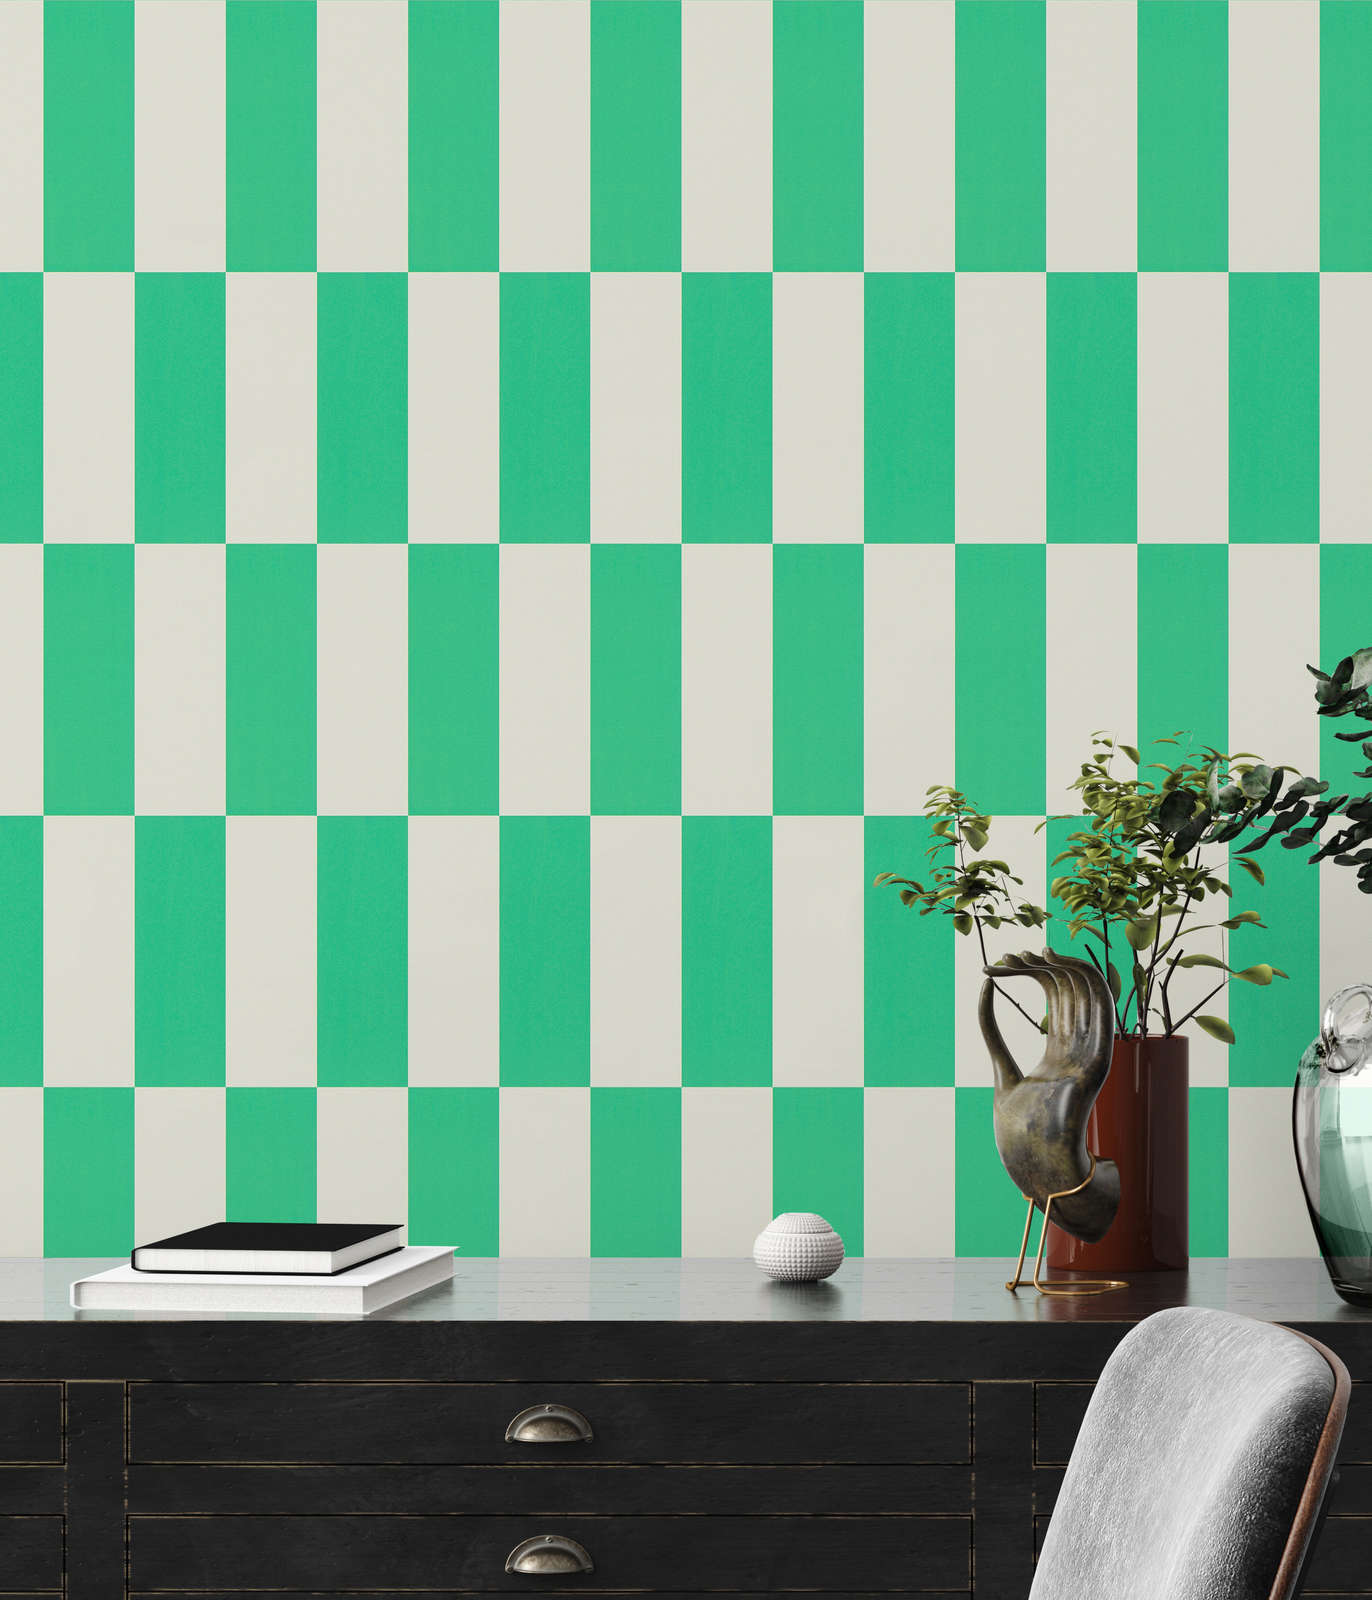             Pattern wallpaper with squares graphic pattern - green, white
        